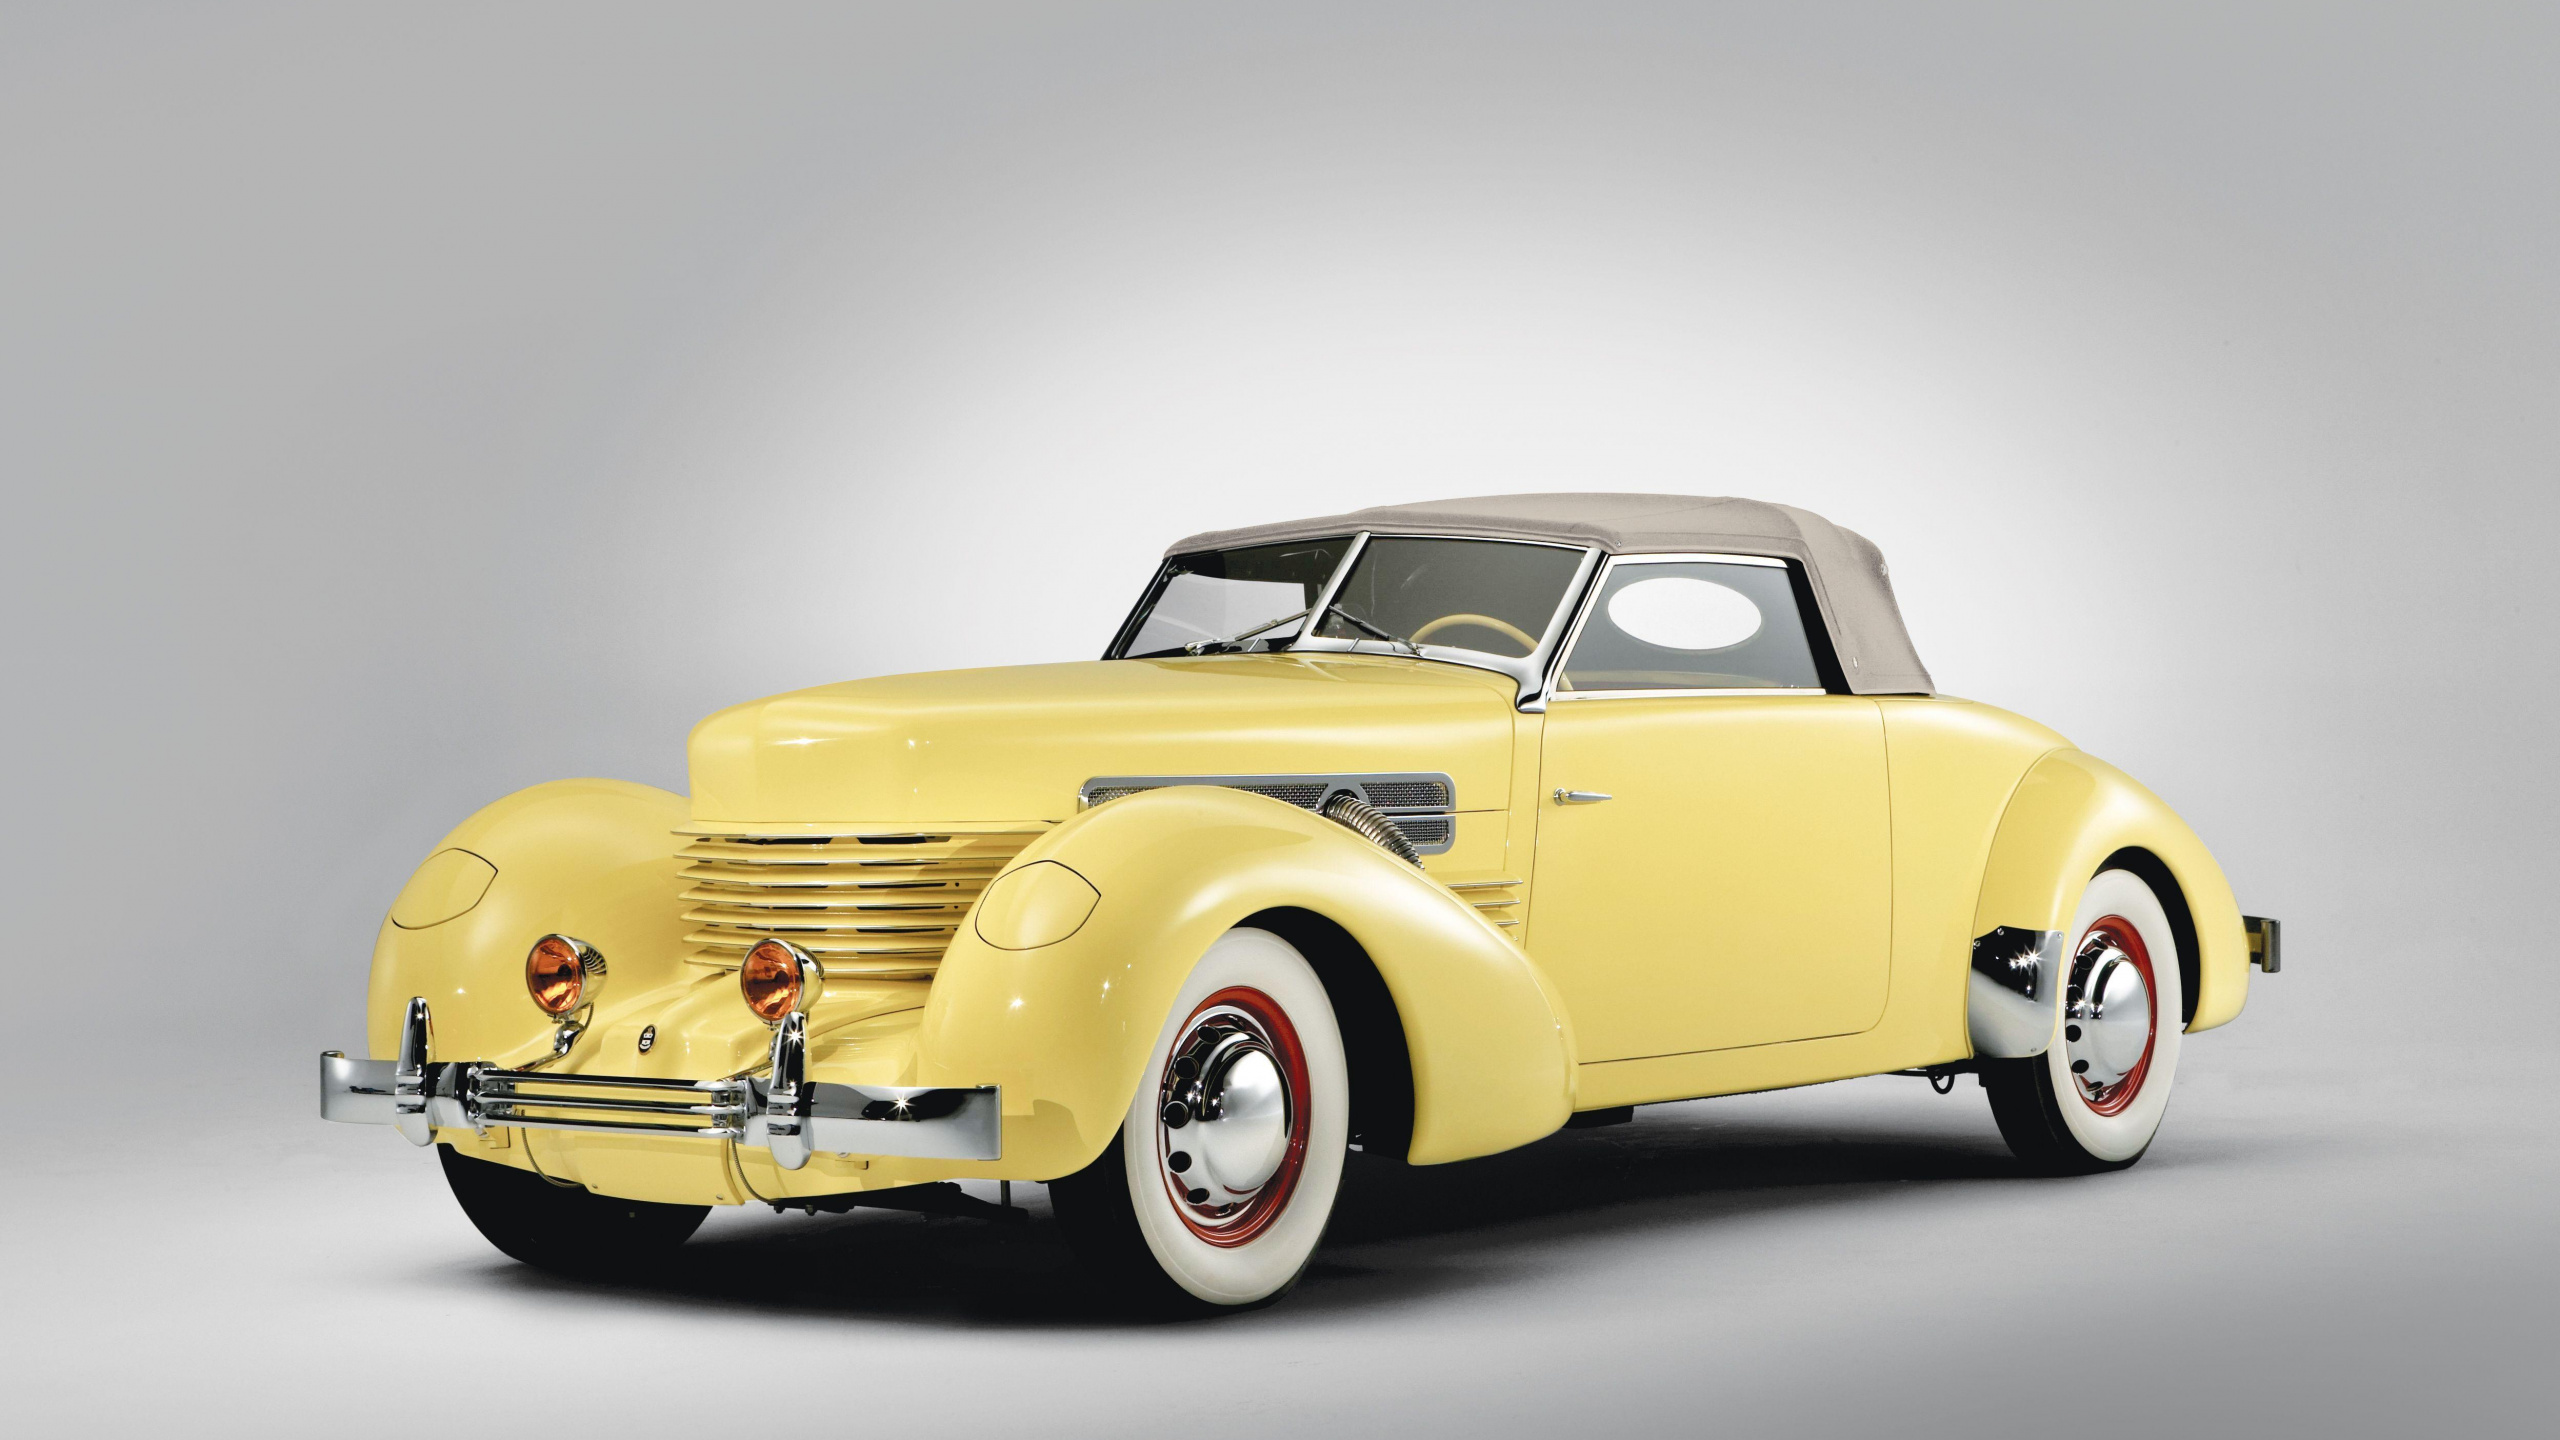 Yellow Vintage Car on White Background. Wallpaper in 2560x1440 Resolution